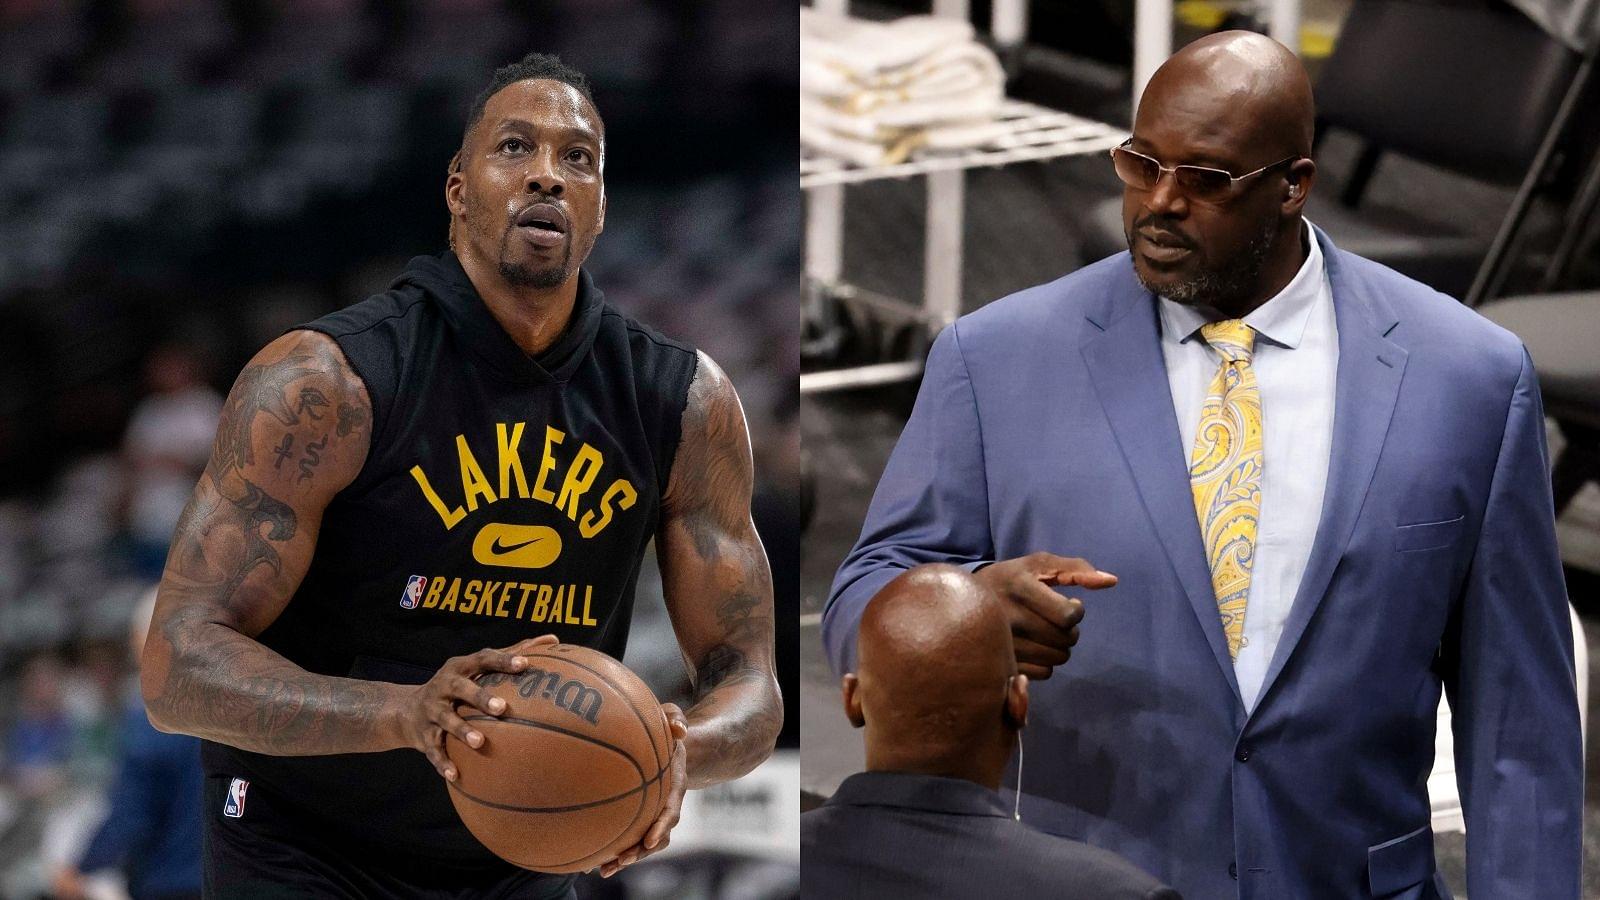 "Shaquille O’Neal refuses to acknowledge Dwight Howard is a Hall-of-Famer": The Diesel continues to throw shade on Lakers Big Man's legacy